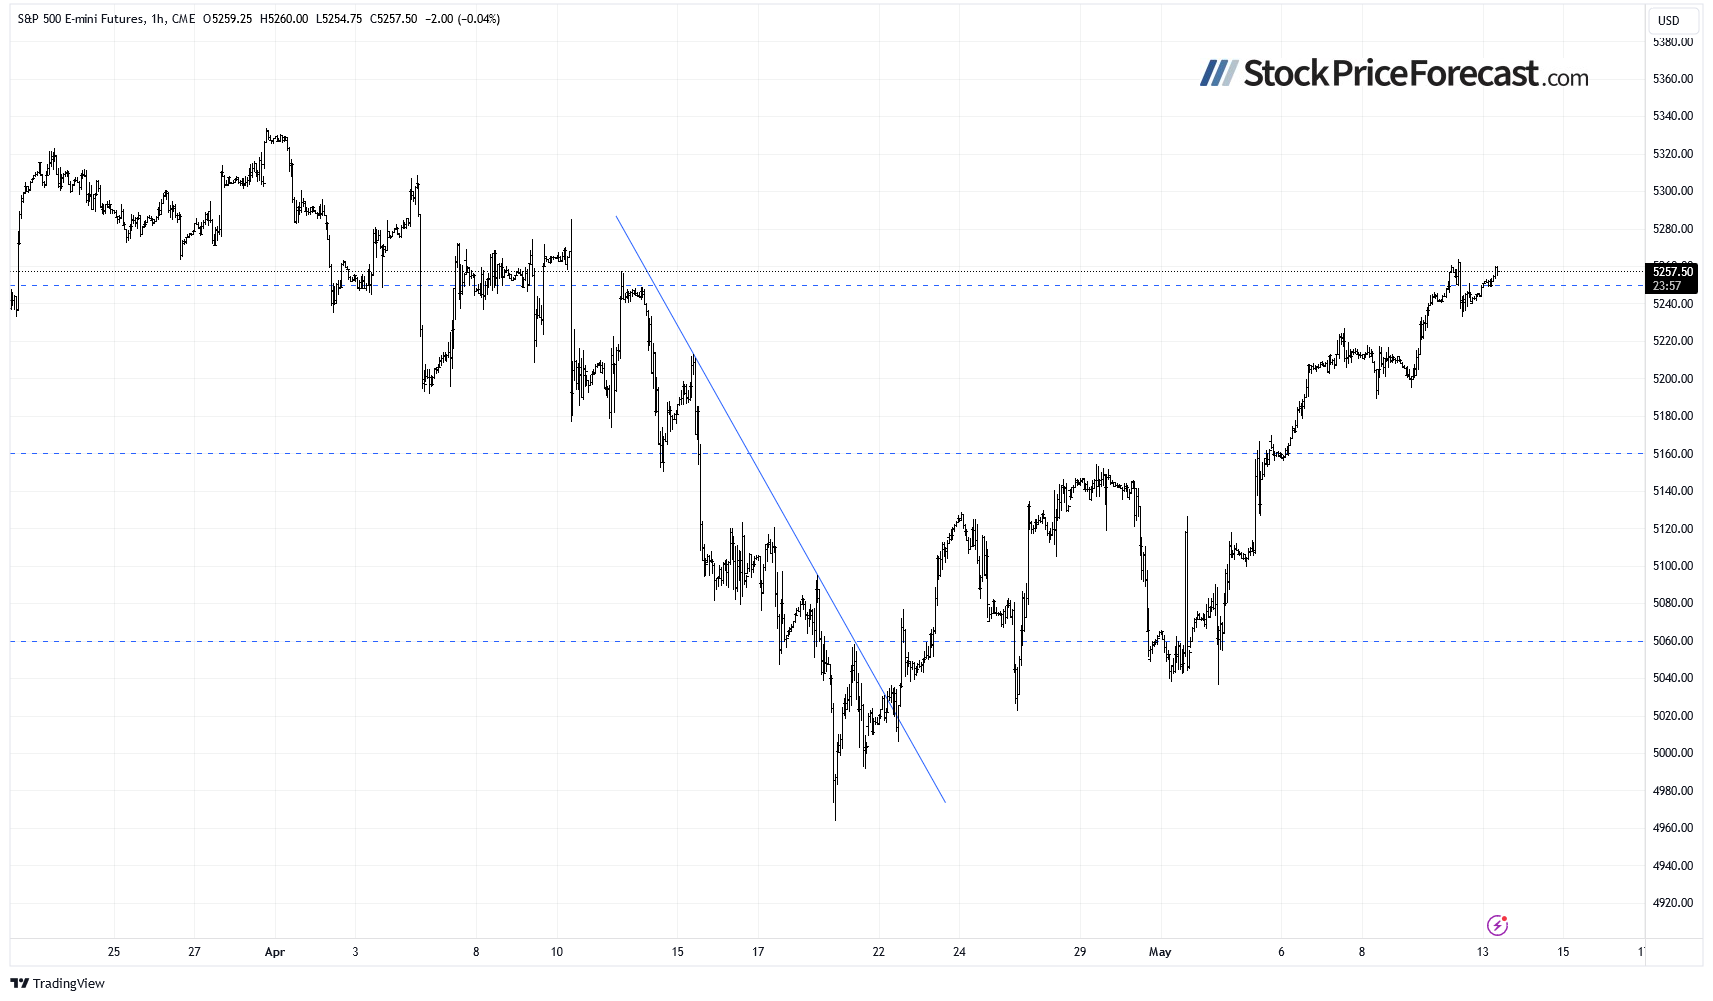 S&P 500 Futures-Hourly Chart